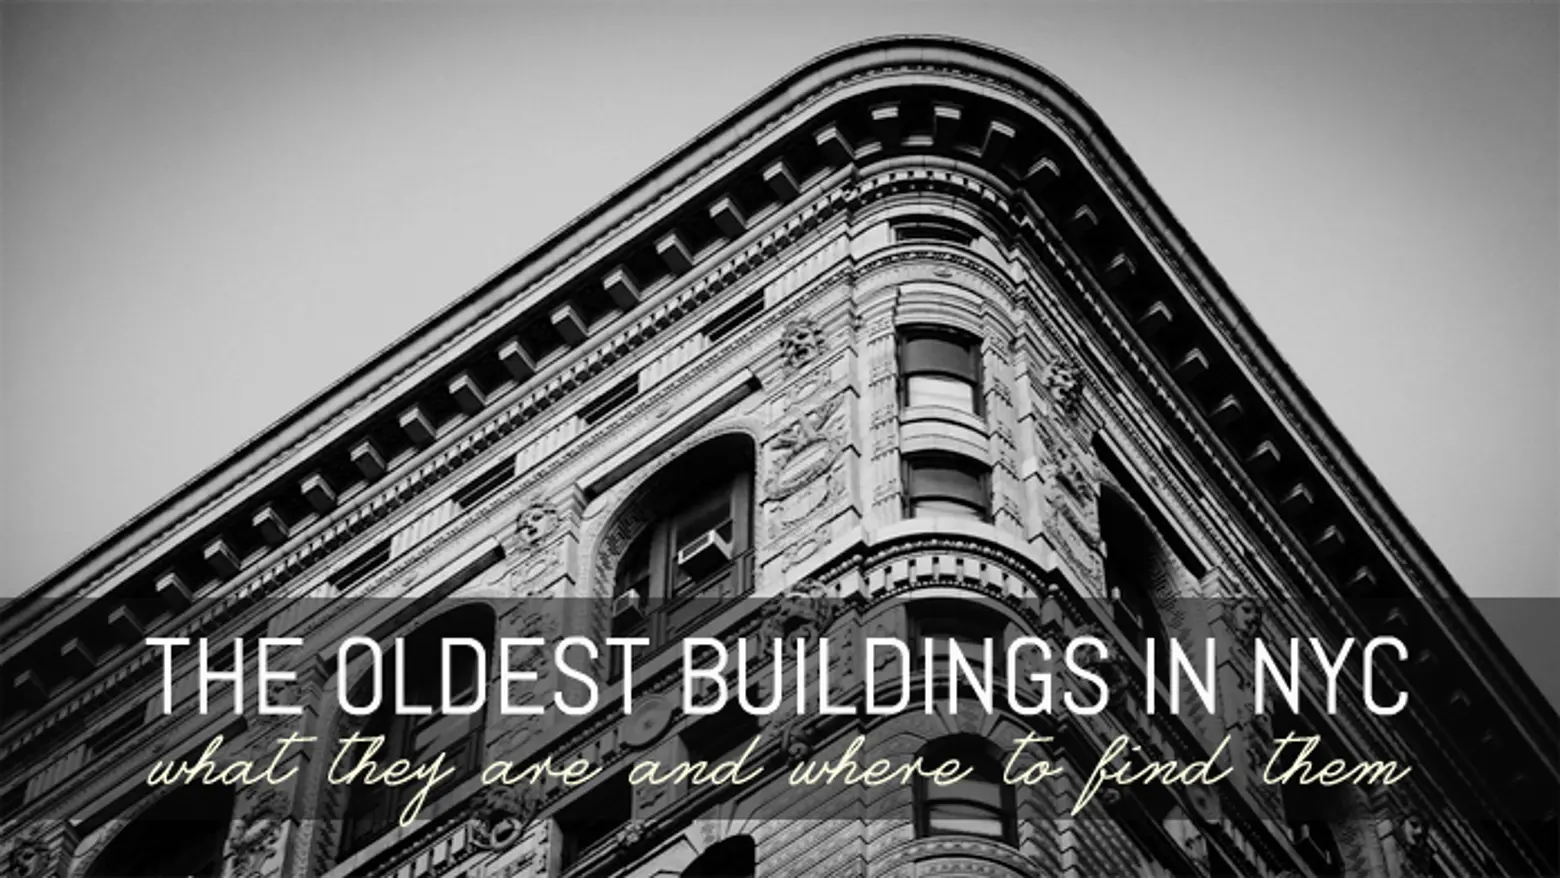 NYC’s Oldest Buildings: What Are They and Where Are They? Test Your Knowledge